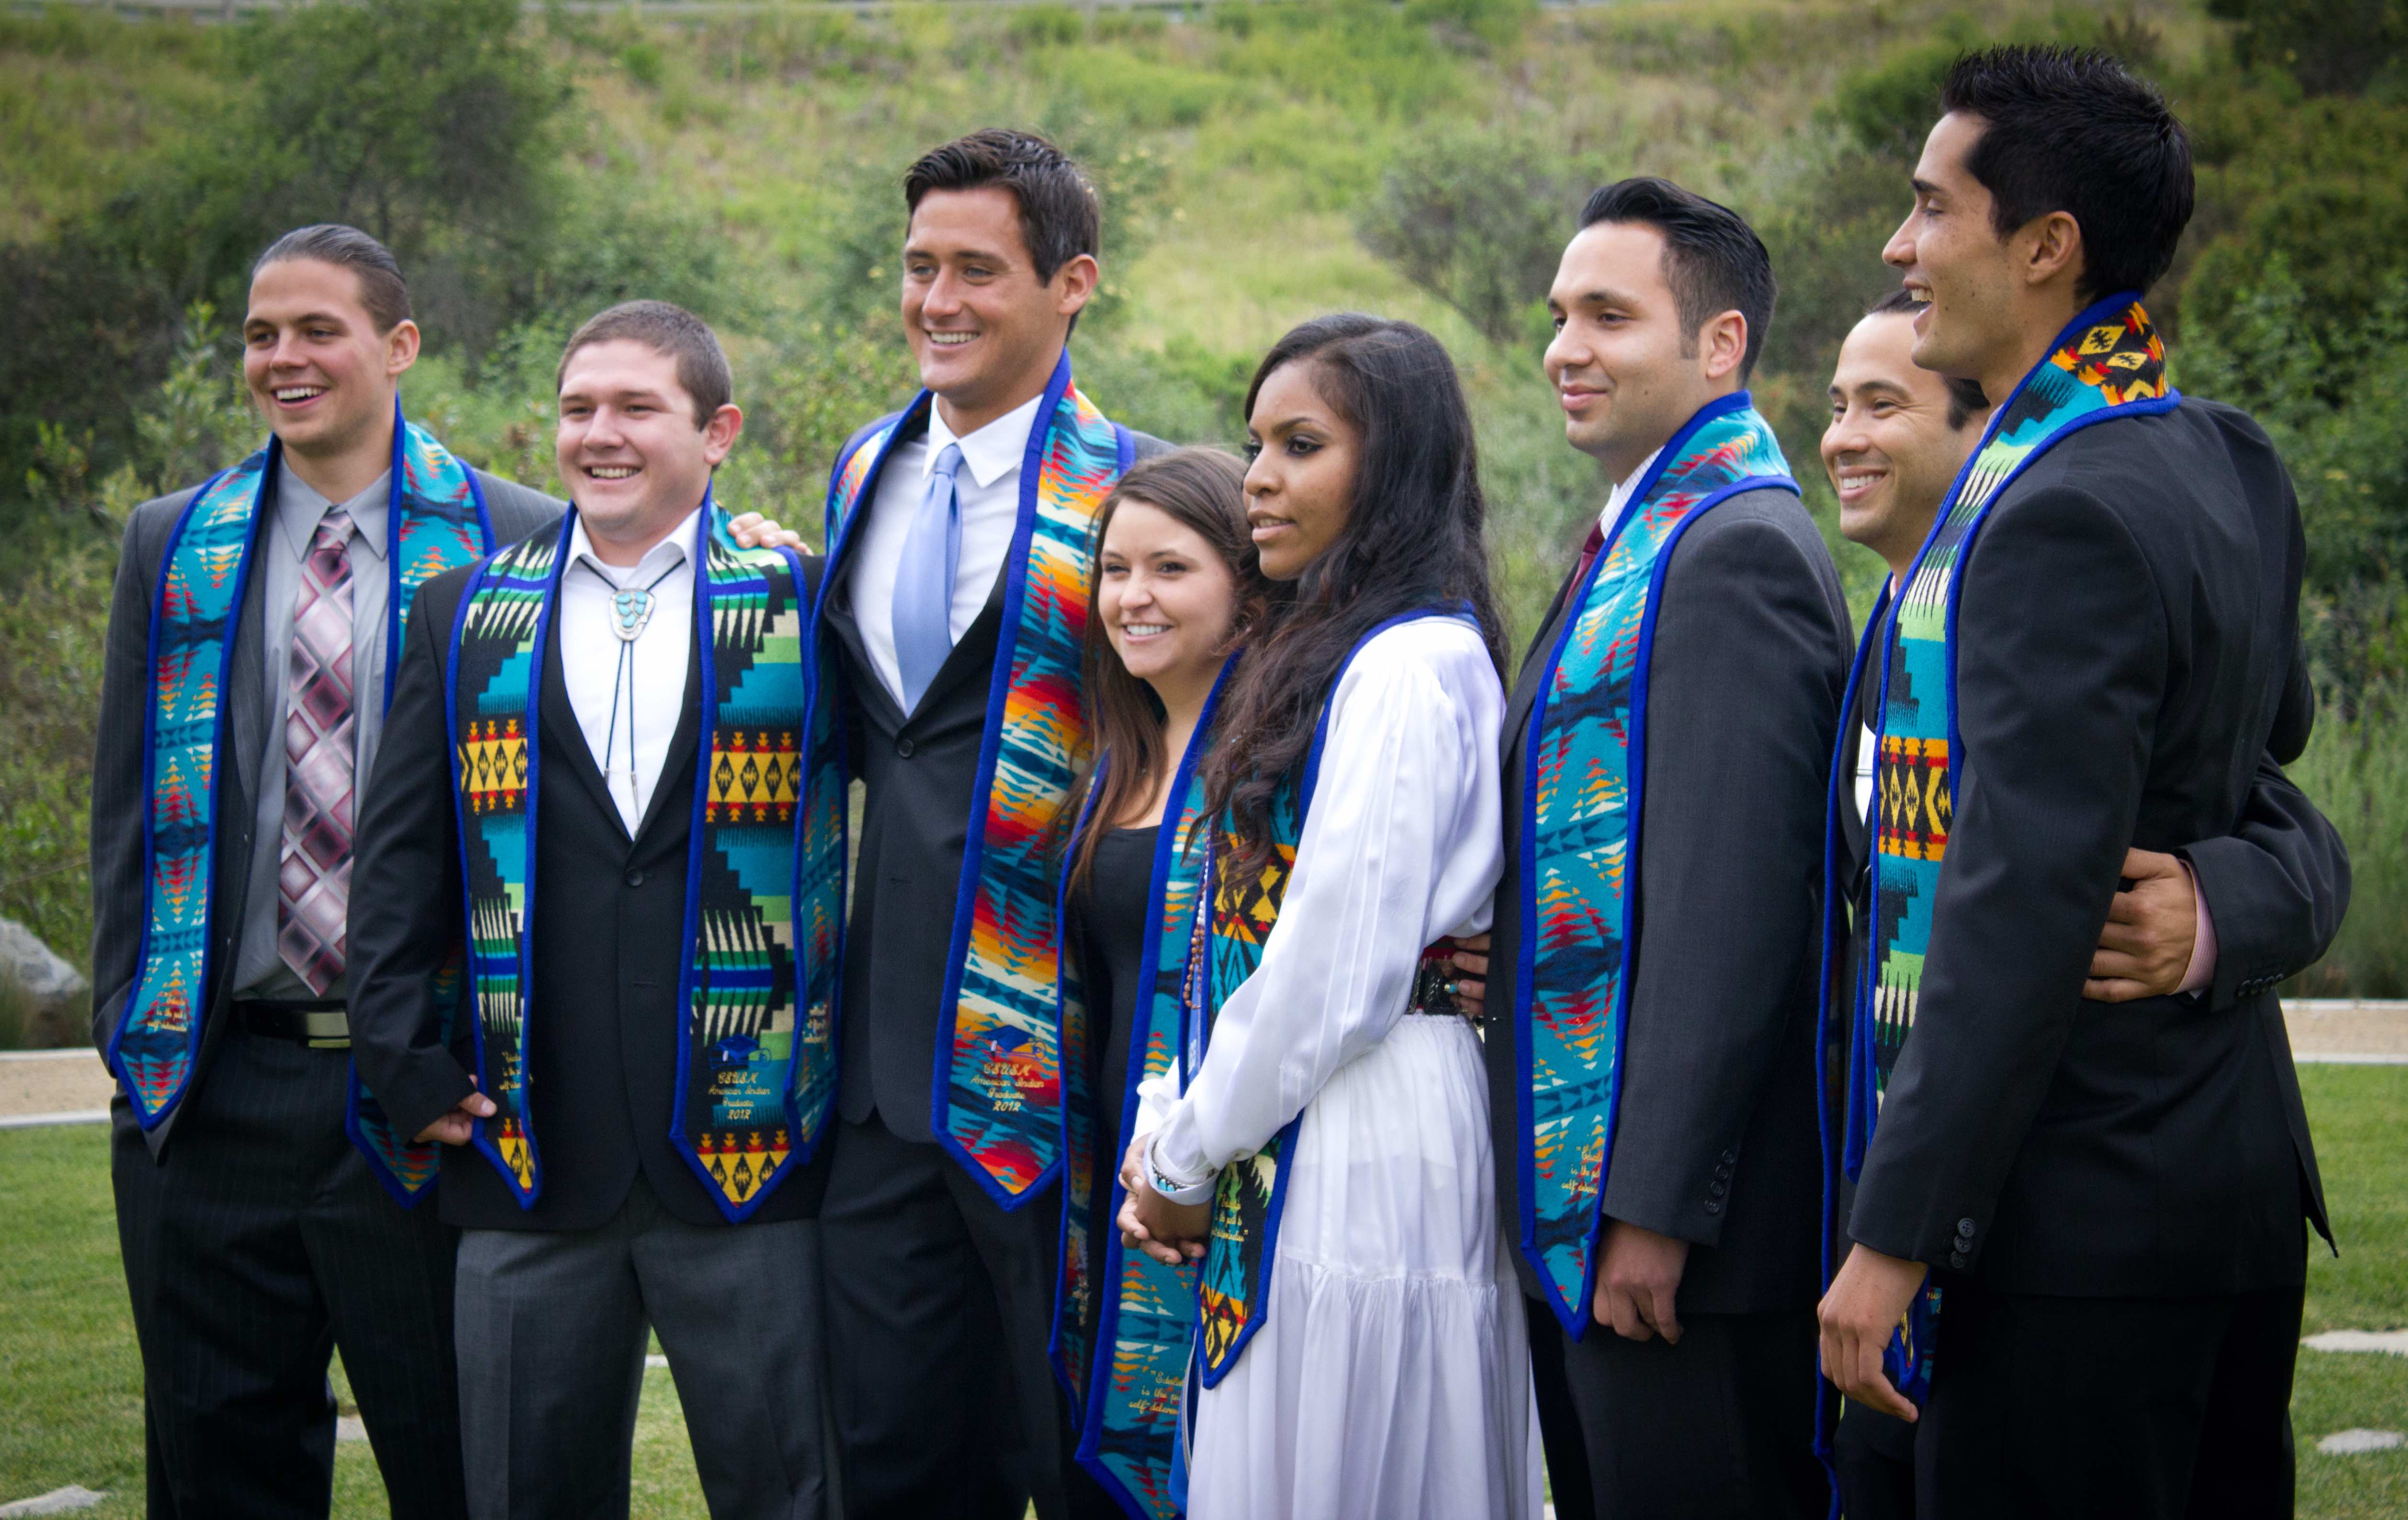 Group of American Indian graduates standing in a horizontal line wearing graduation stoles over their formal clothes, smiling at the camera, standing outside on green grass in front of a landscape of green trees and hills